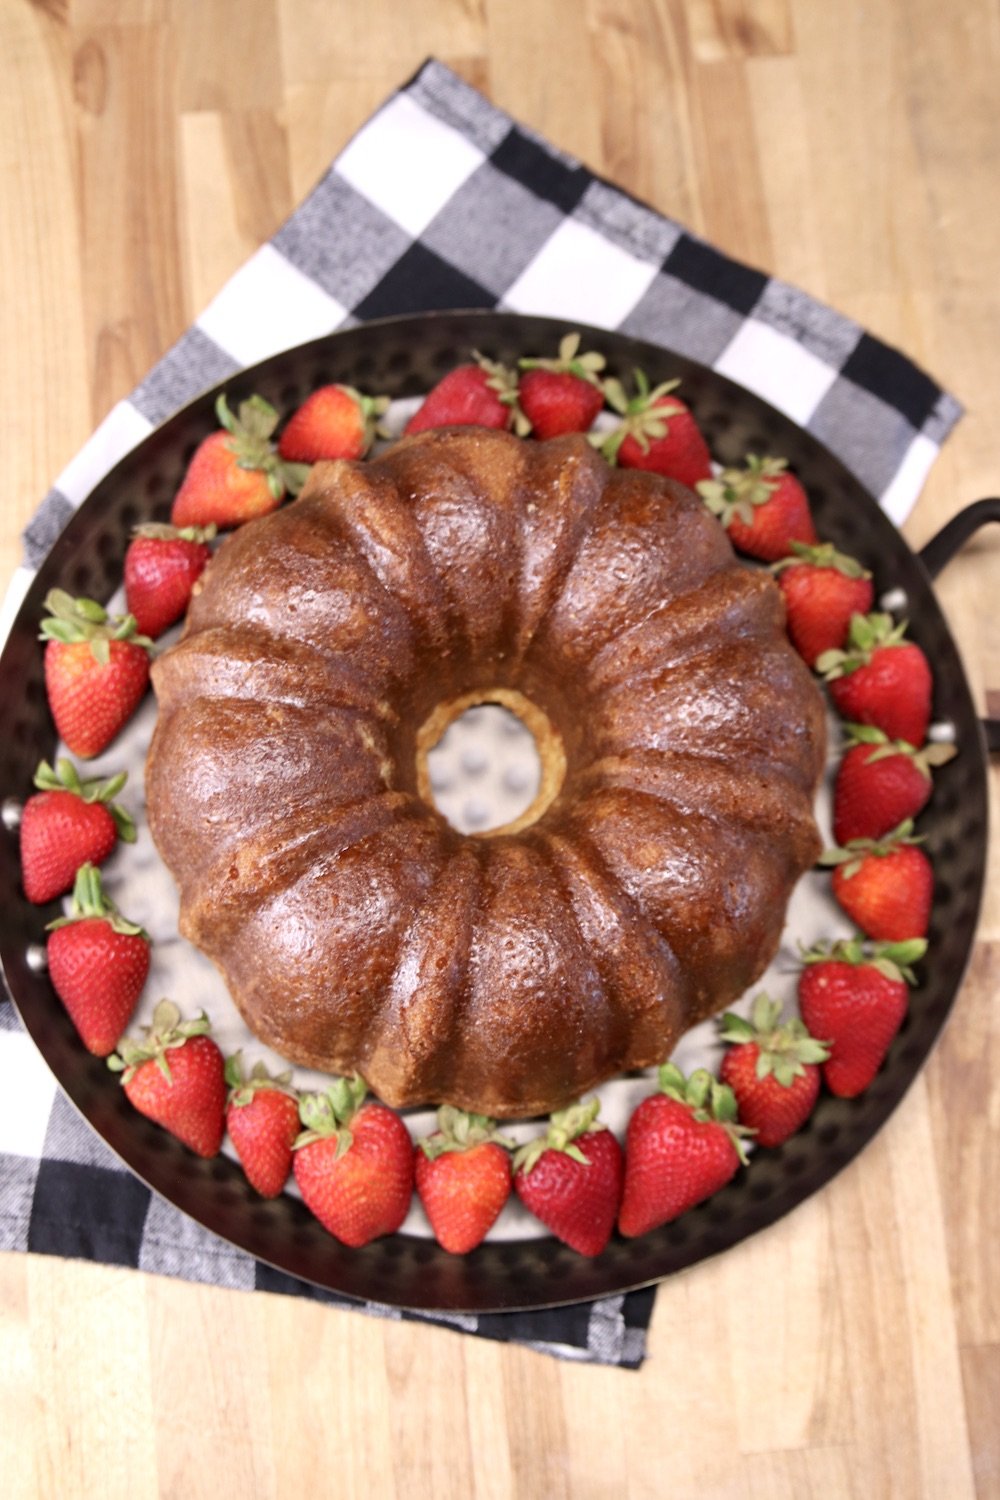 Amaretto pound cake on a tray surrounded with fresh starwberries